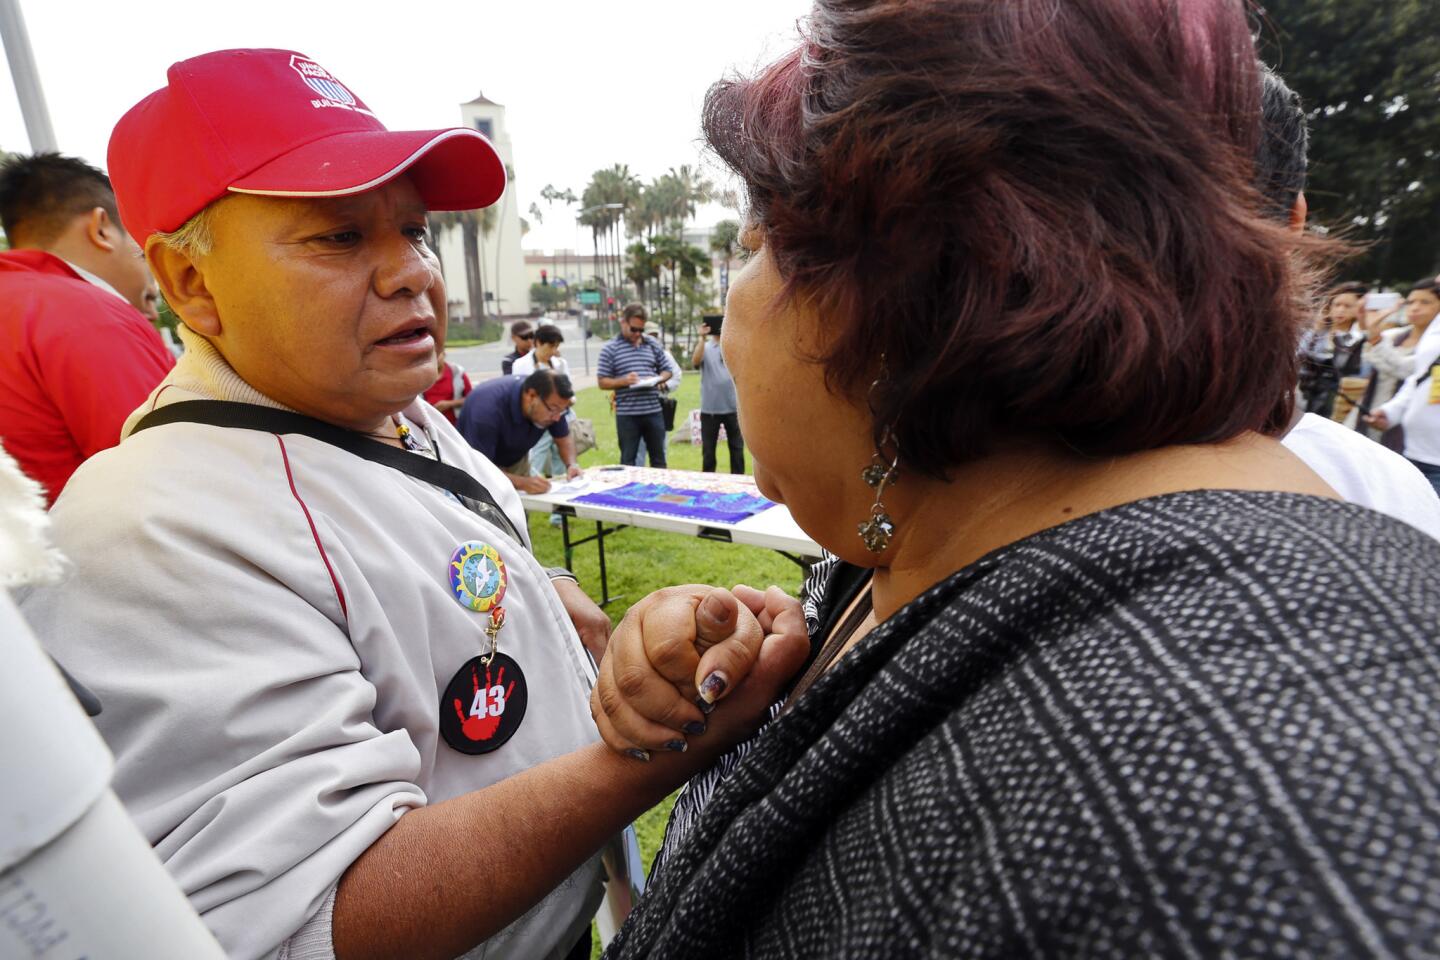 Estanislao Mendoza Chocalate, left, father of missing student Miguel Angel Mendoza Zacarias, receives support from Juana Nicolas at the rally. Some family members of 43 missing students from Ayotzinapa, Mexico, held a rally on March 21, 2015 at Olvera Street to raise awareness.